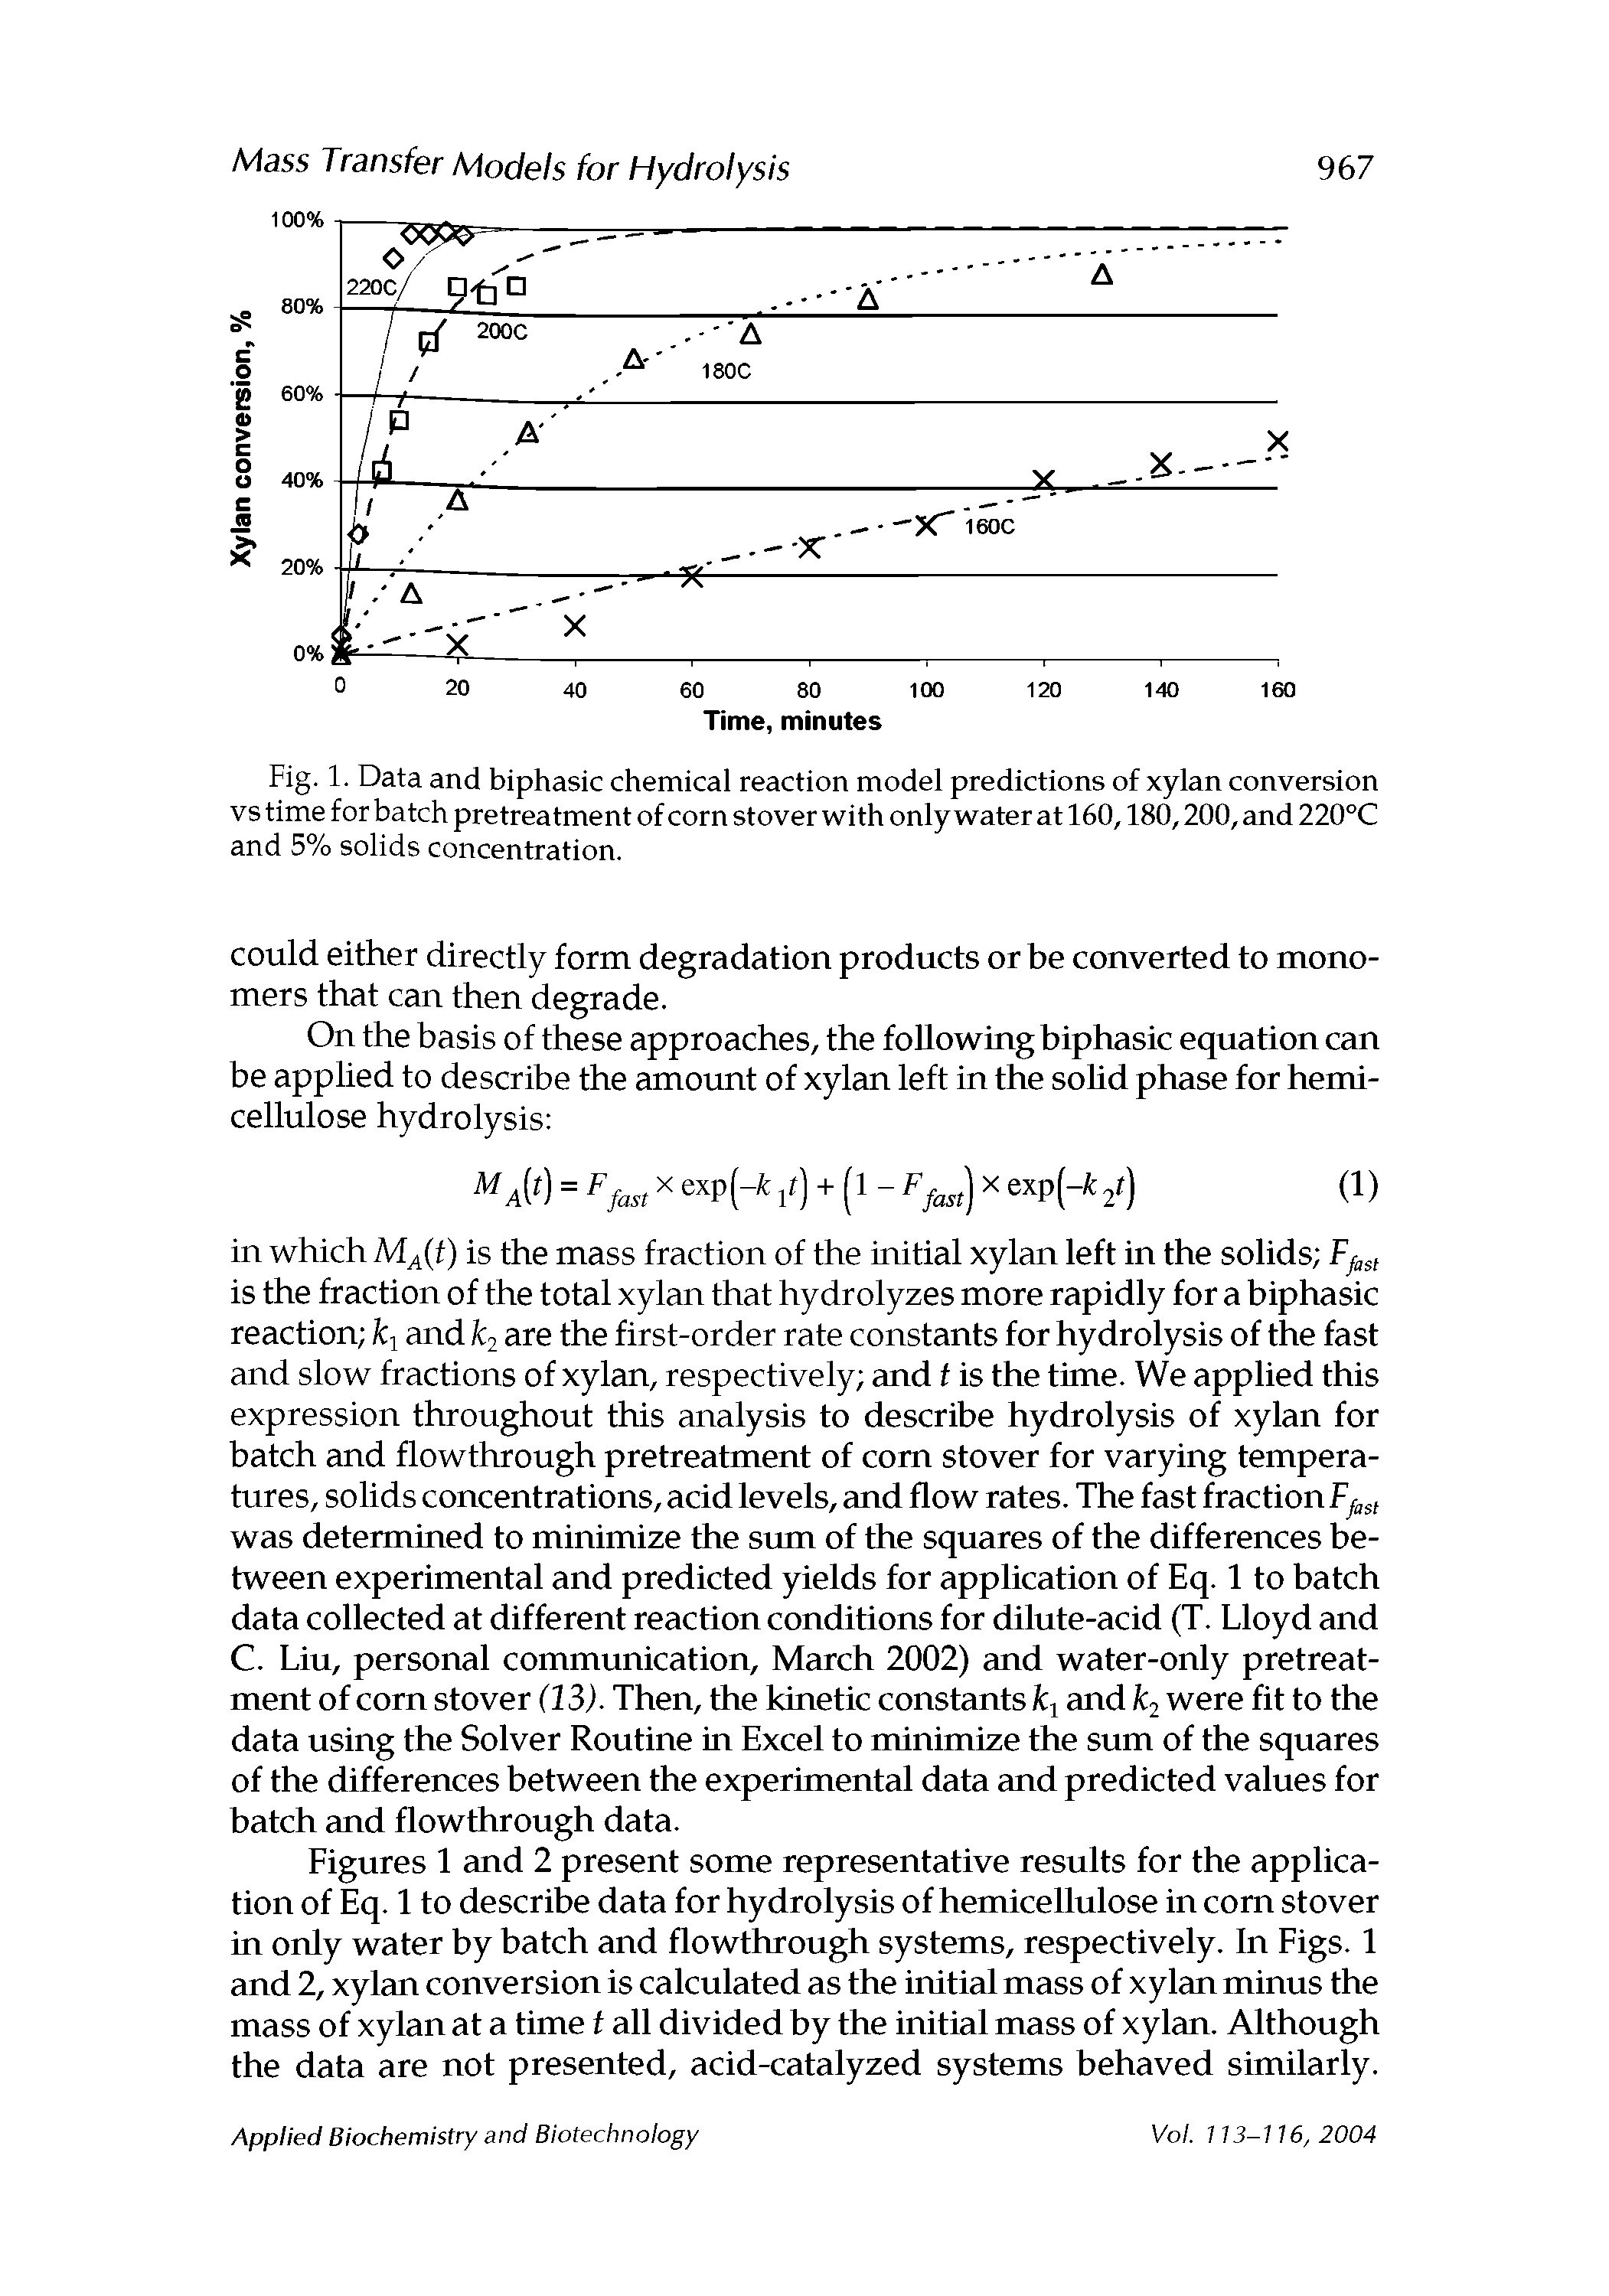 Fig. 1. Data and biphasic chemical reaction model predictions of xylan conversion vs time for batch pretreatment of corn stover with only water at 160,180,200, and 220°C and 5% solids concentration.